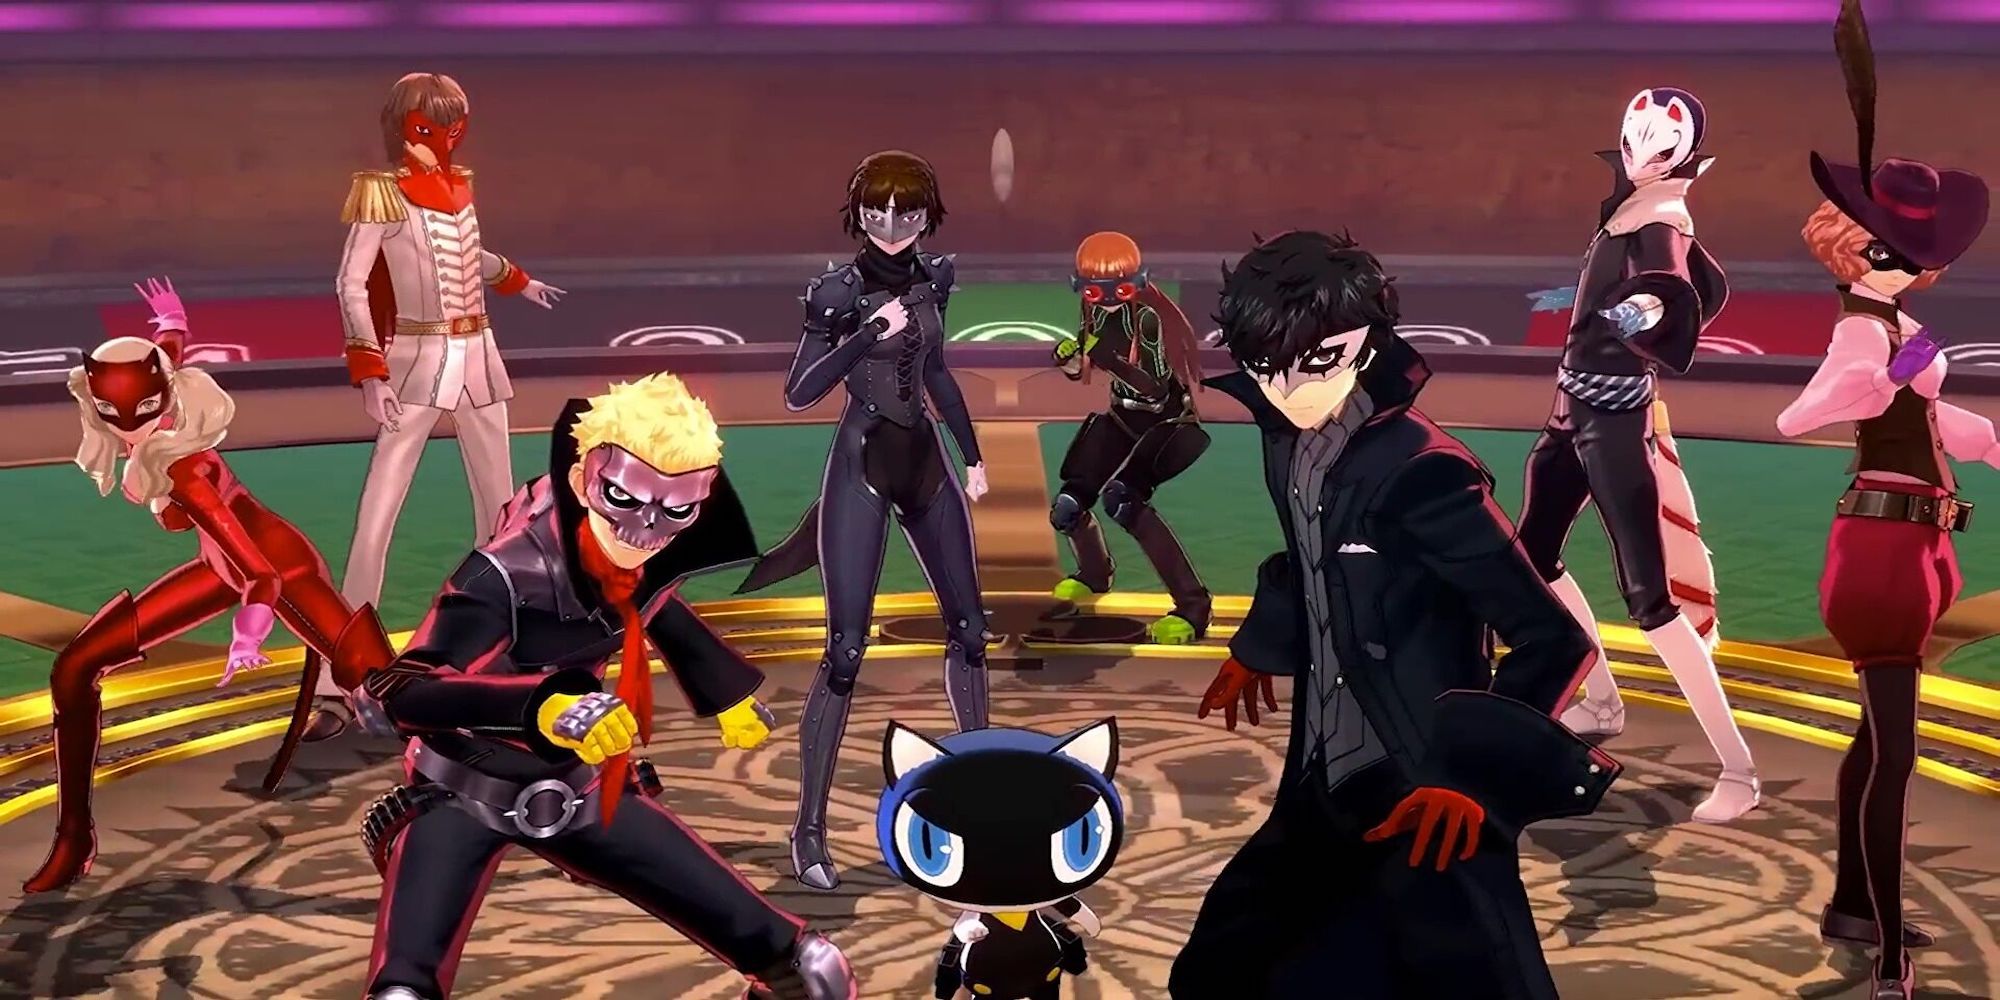 Persona 5 Royal cast of characters